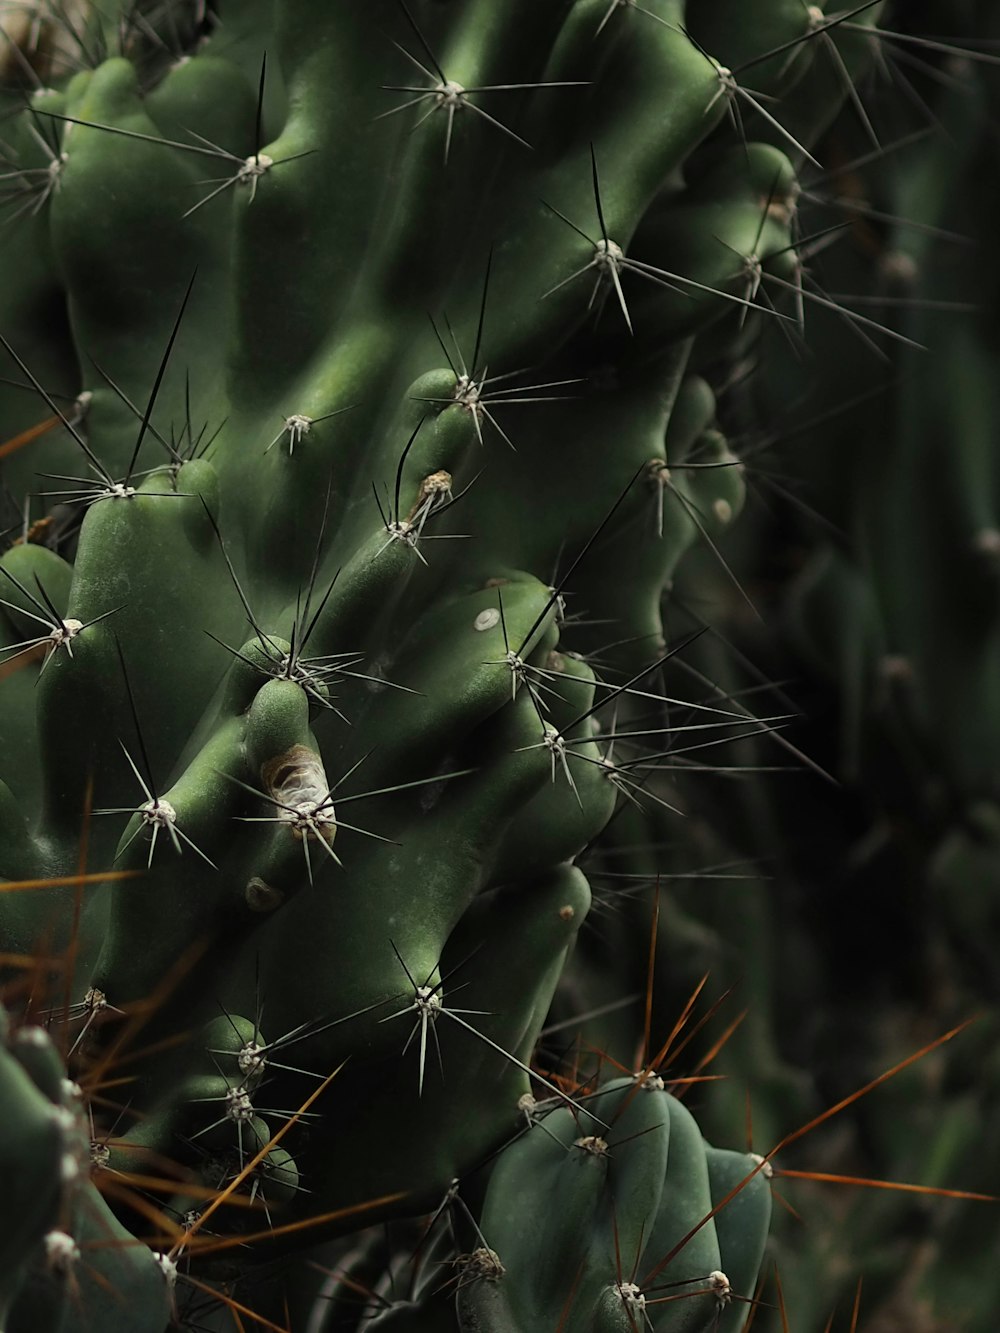 a close up of a cactus with many small needles